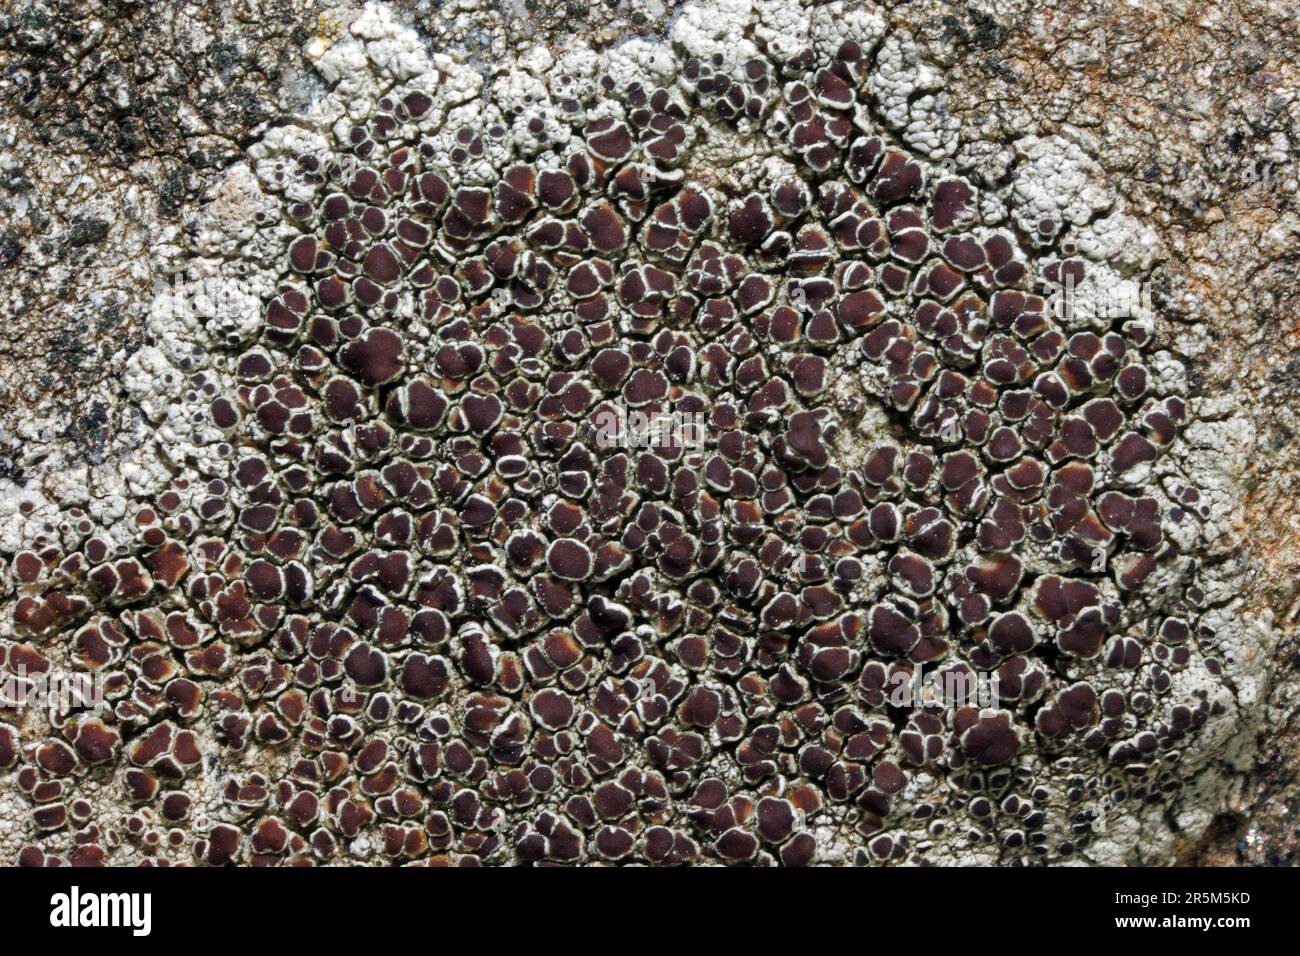 Lecanora campestris is a crustose lichen found on calcareous stone and walls, nutrient-enriched acidic rocks and asphalt. It is widespread in the UK. Stock Photo